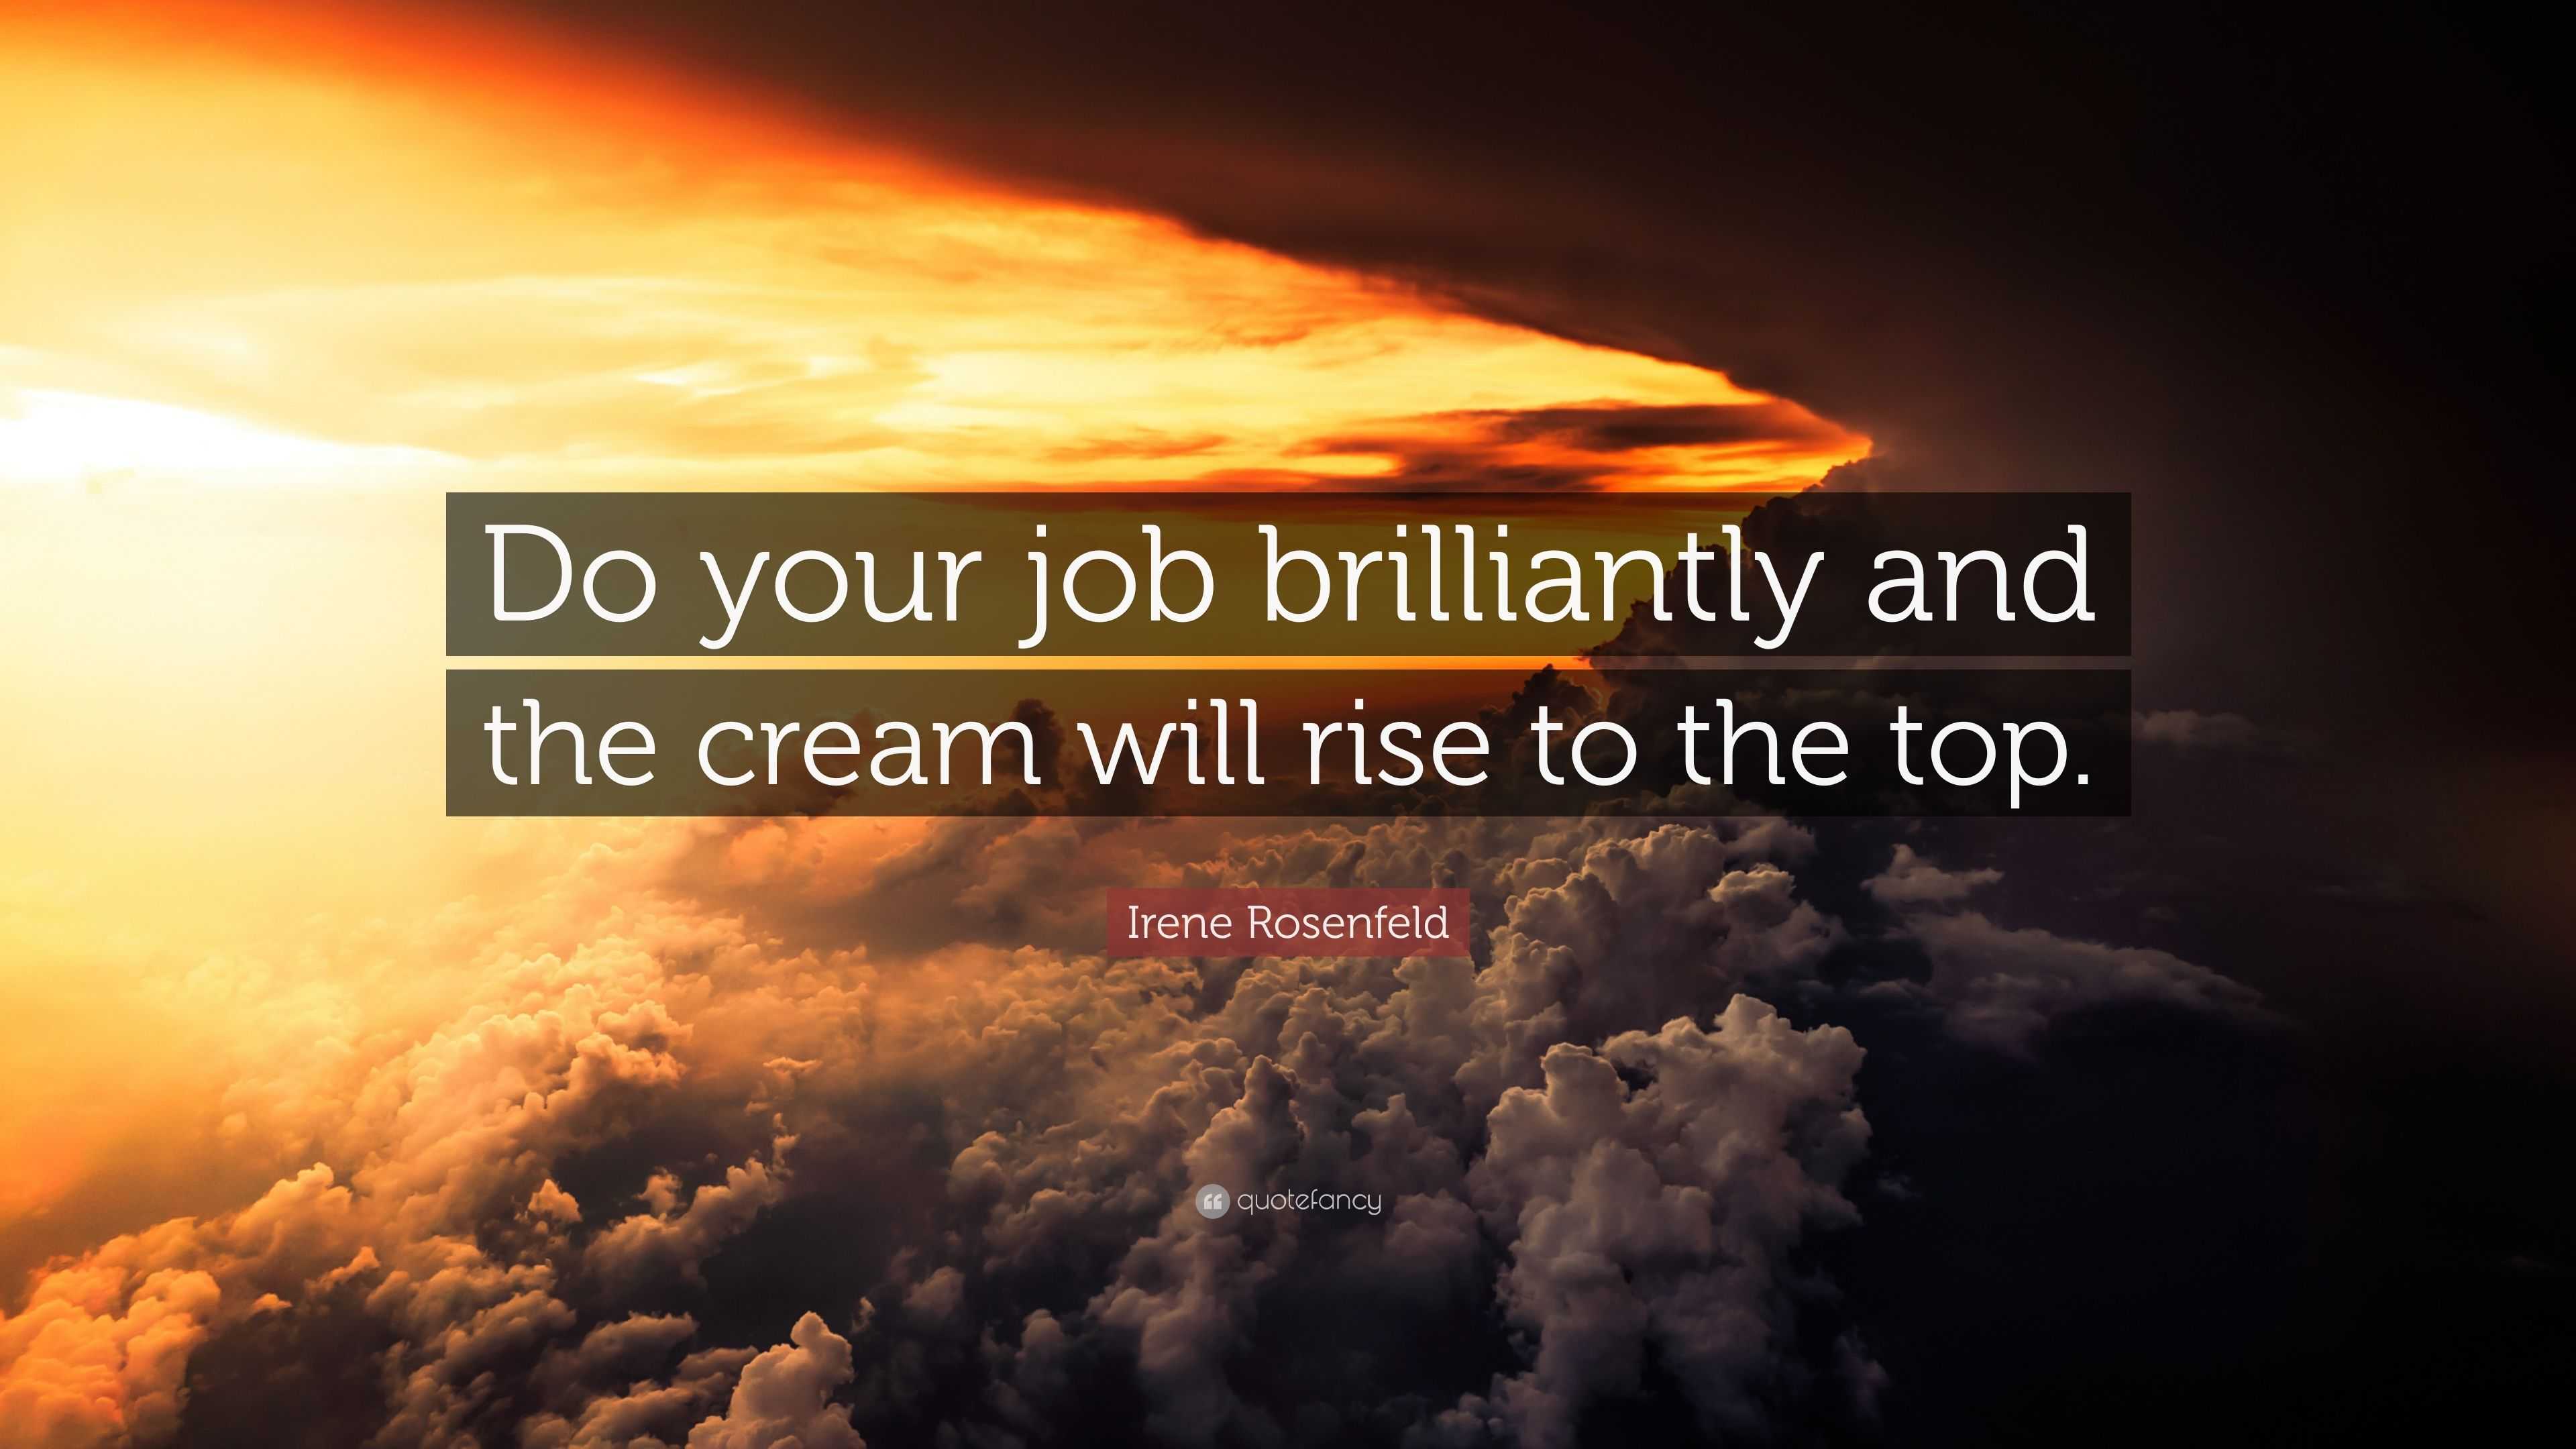 Irene Rosenfeld Quote: “Do your job brilliantly and the cream will rise